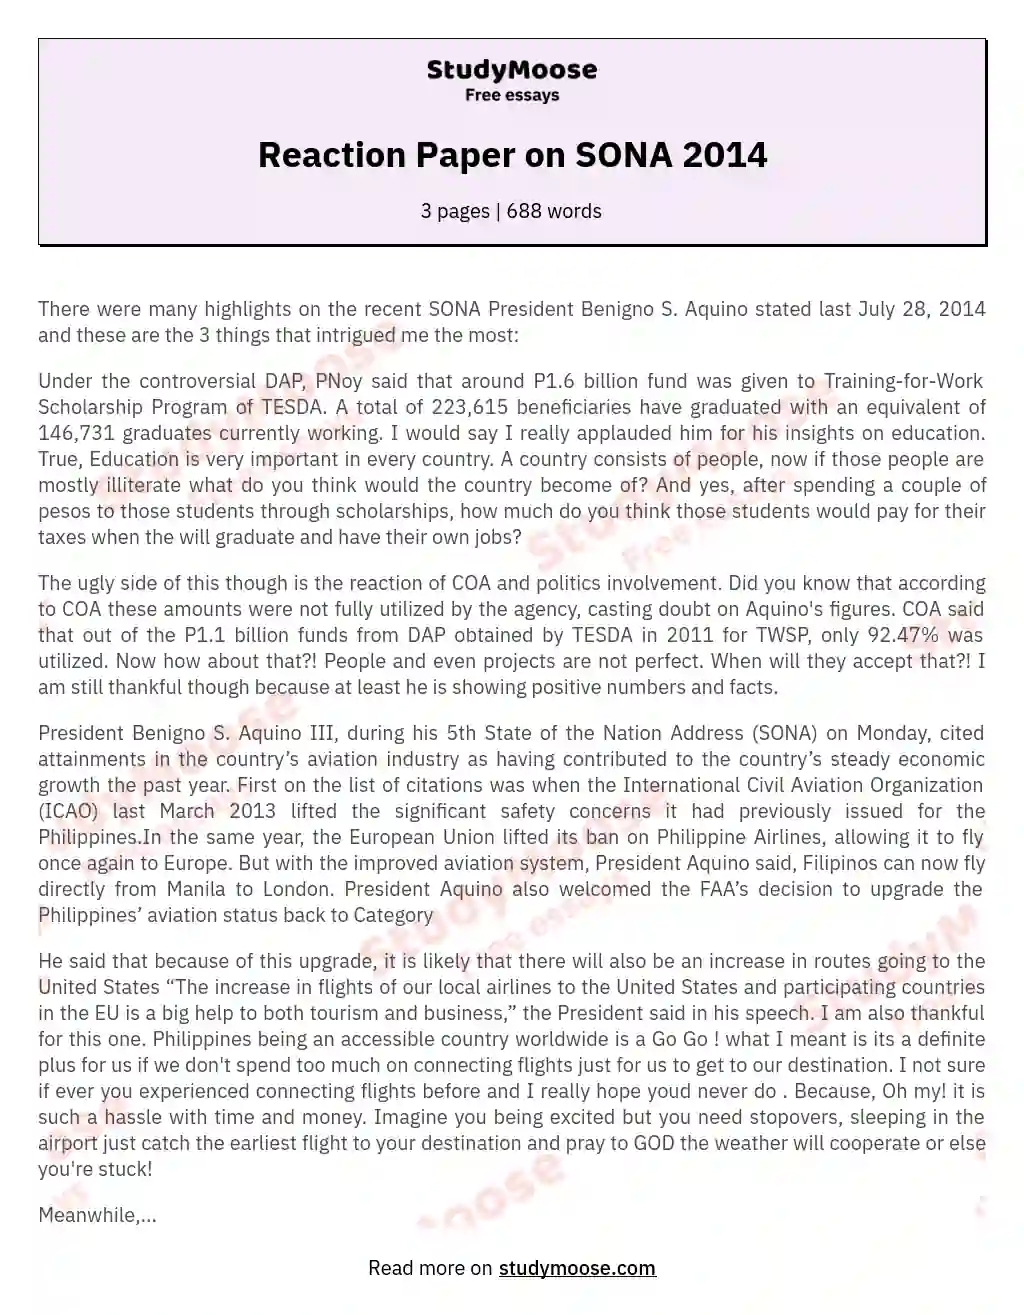 Reaction Paper on SONA 2014 essay